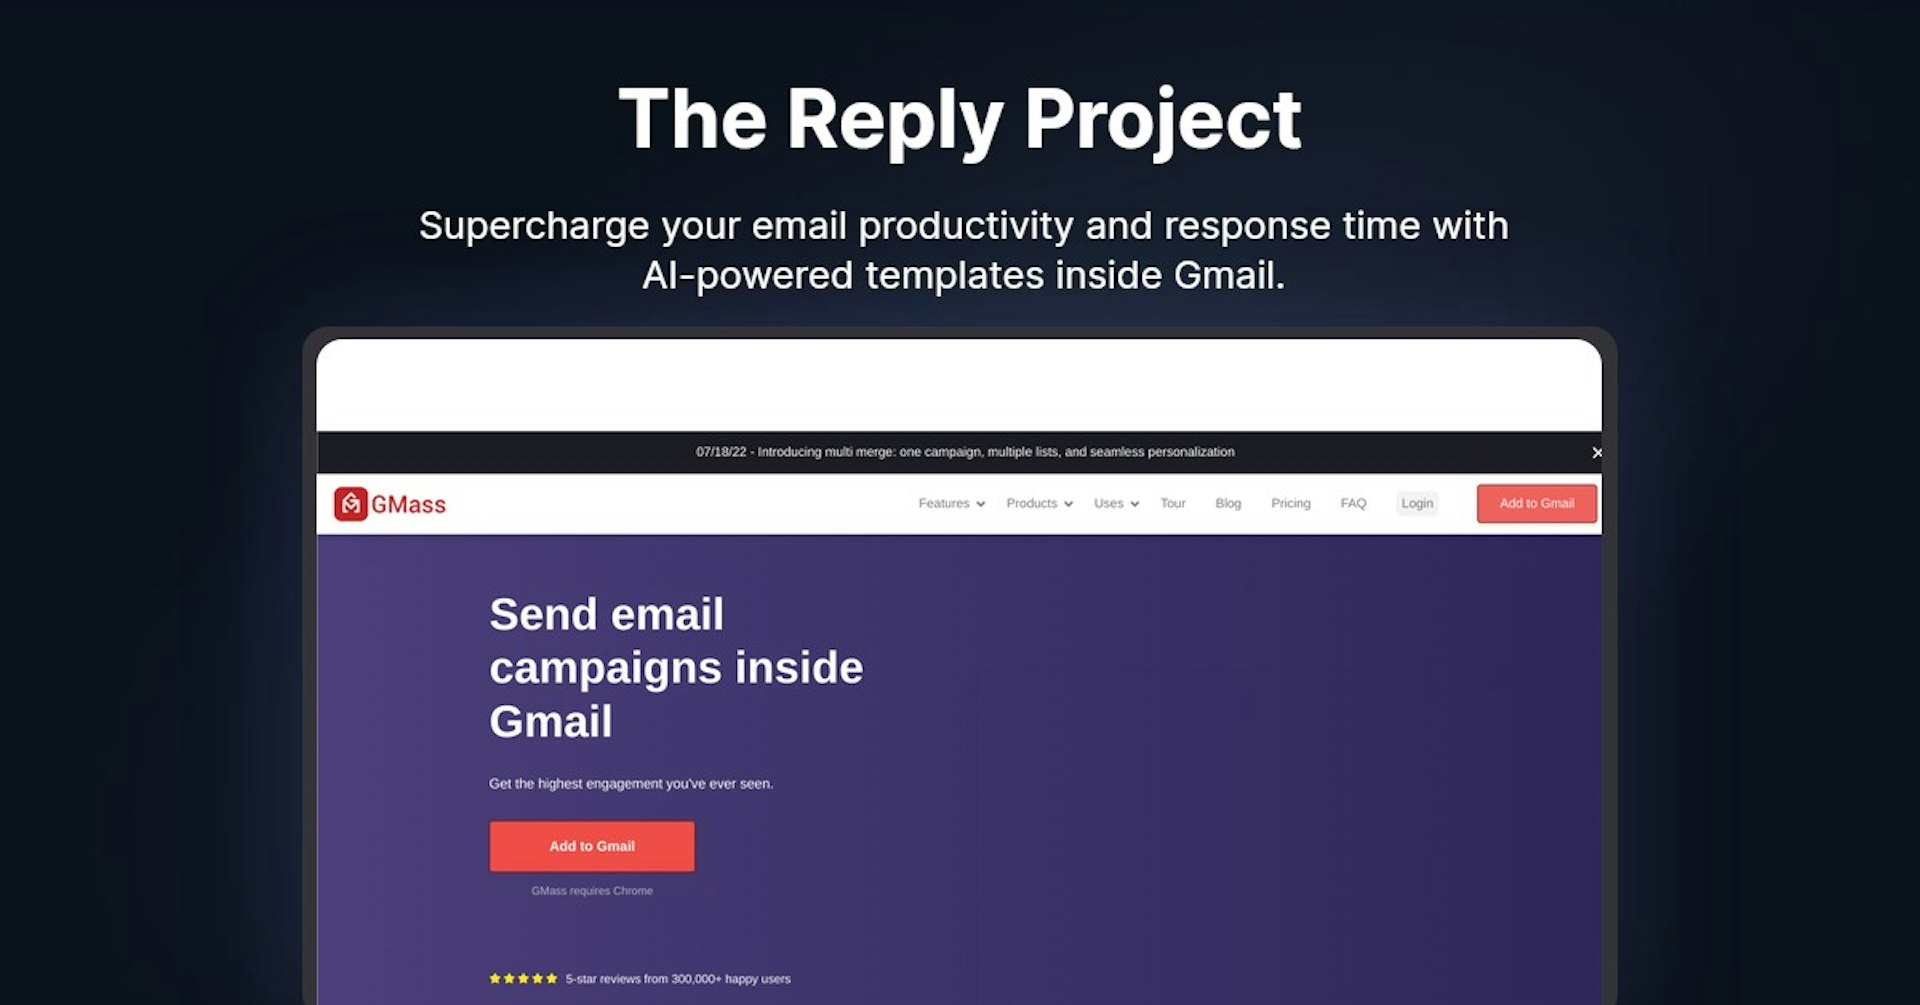 The Reply Project